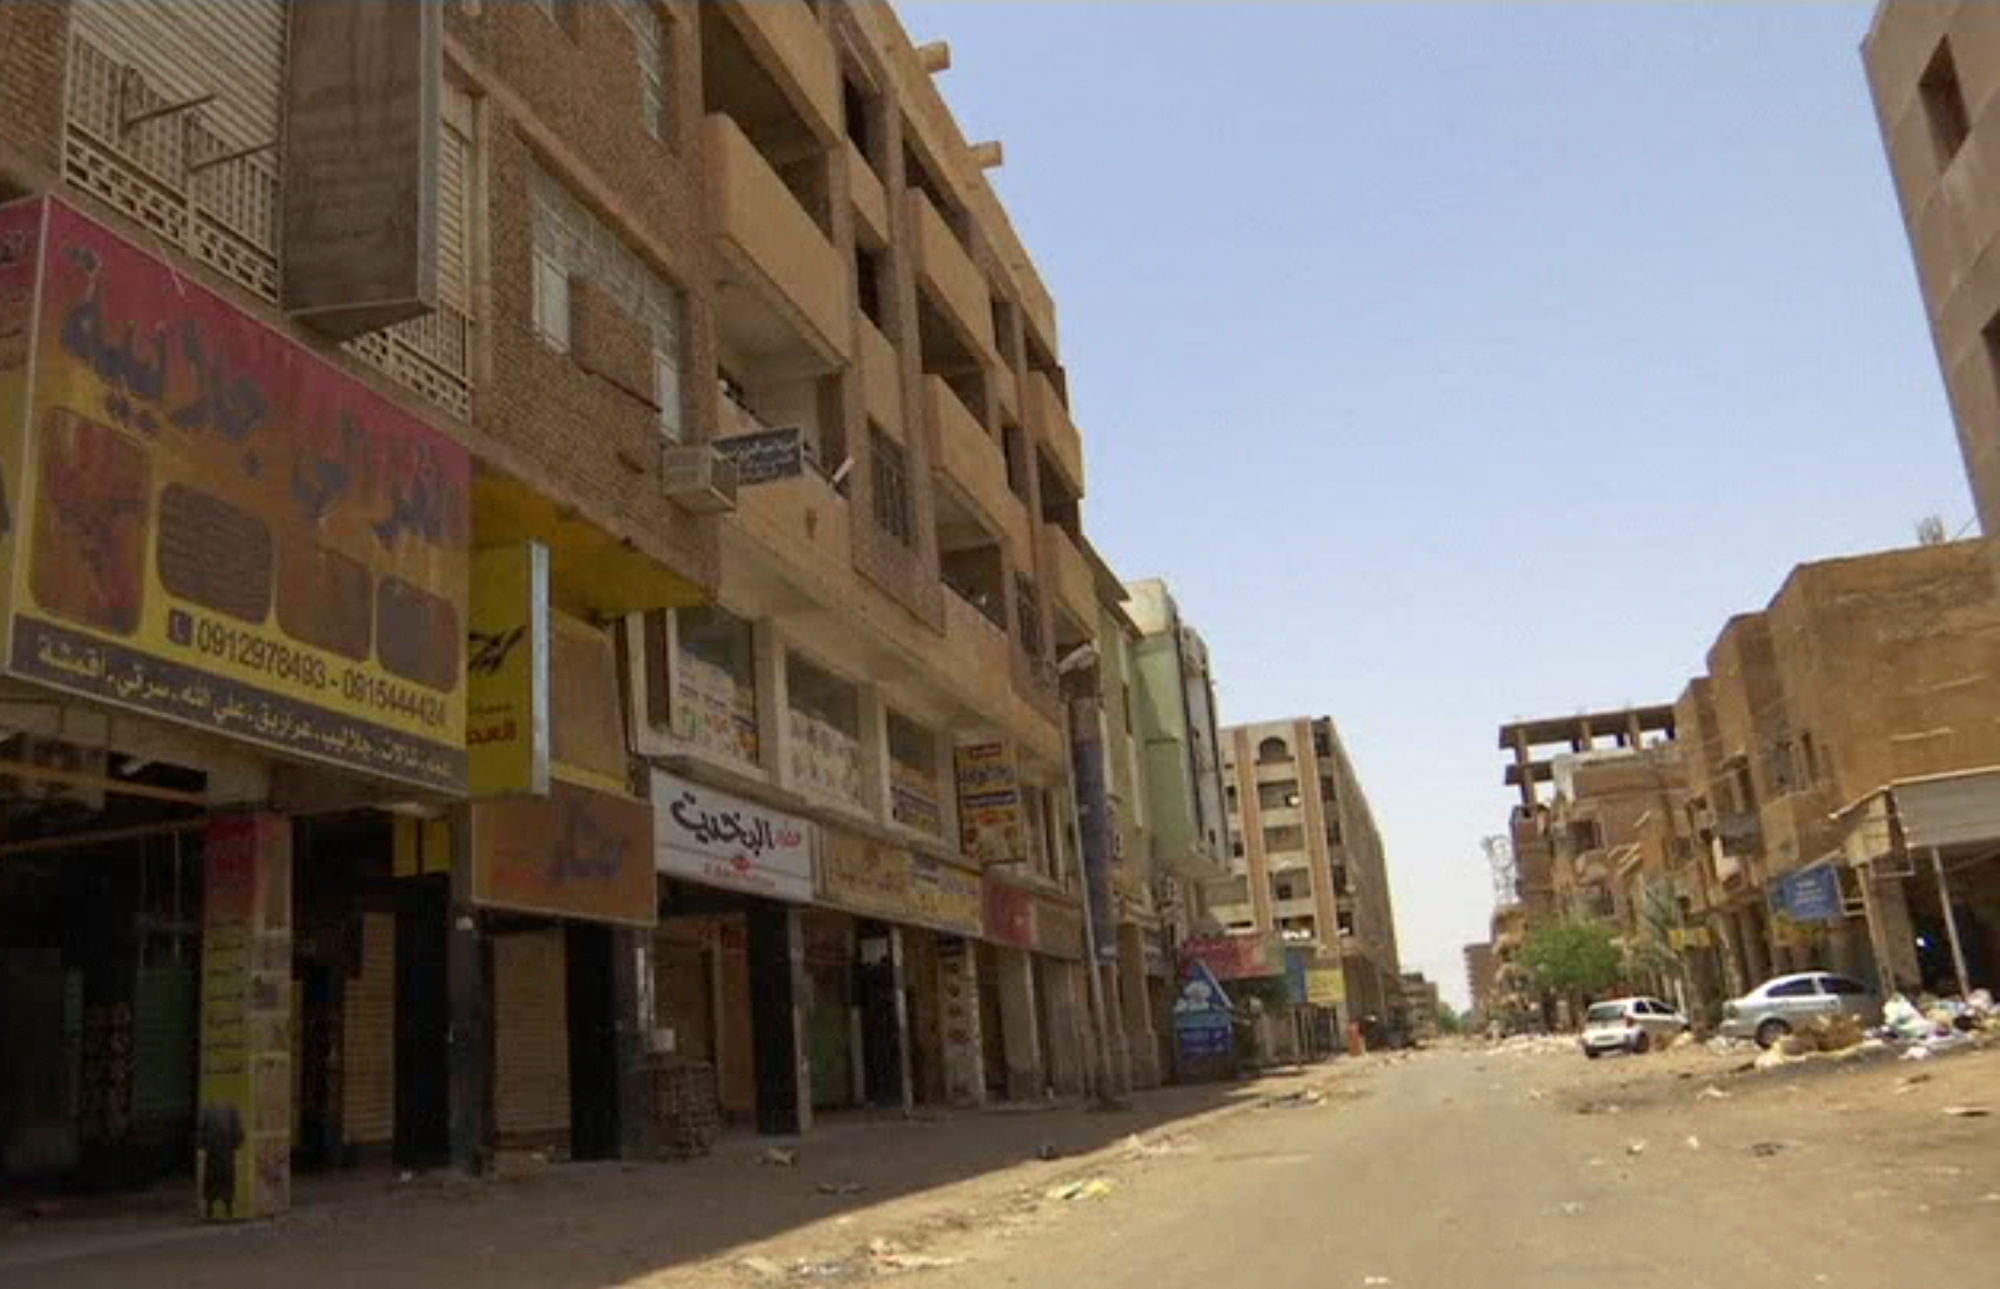 Shops were closed and streets were empty across Sudan on Sunday, 9 June, the first day of a general strike called for the start of the workweek by protest leaders demanding the resignation of the ruling military council.